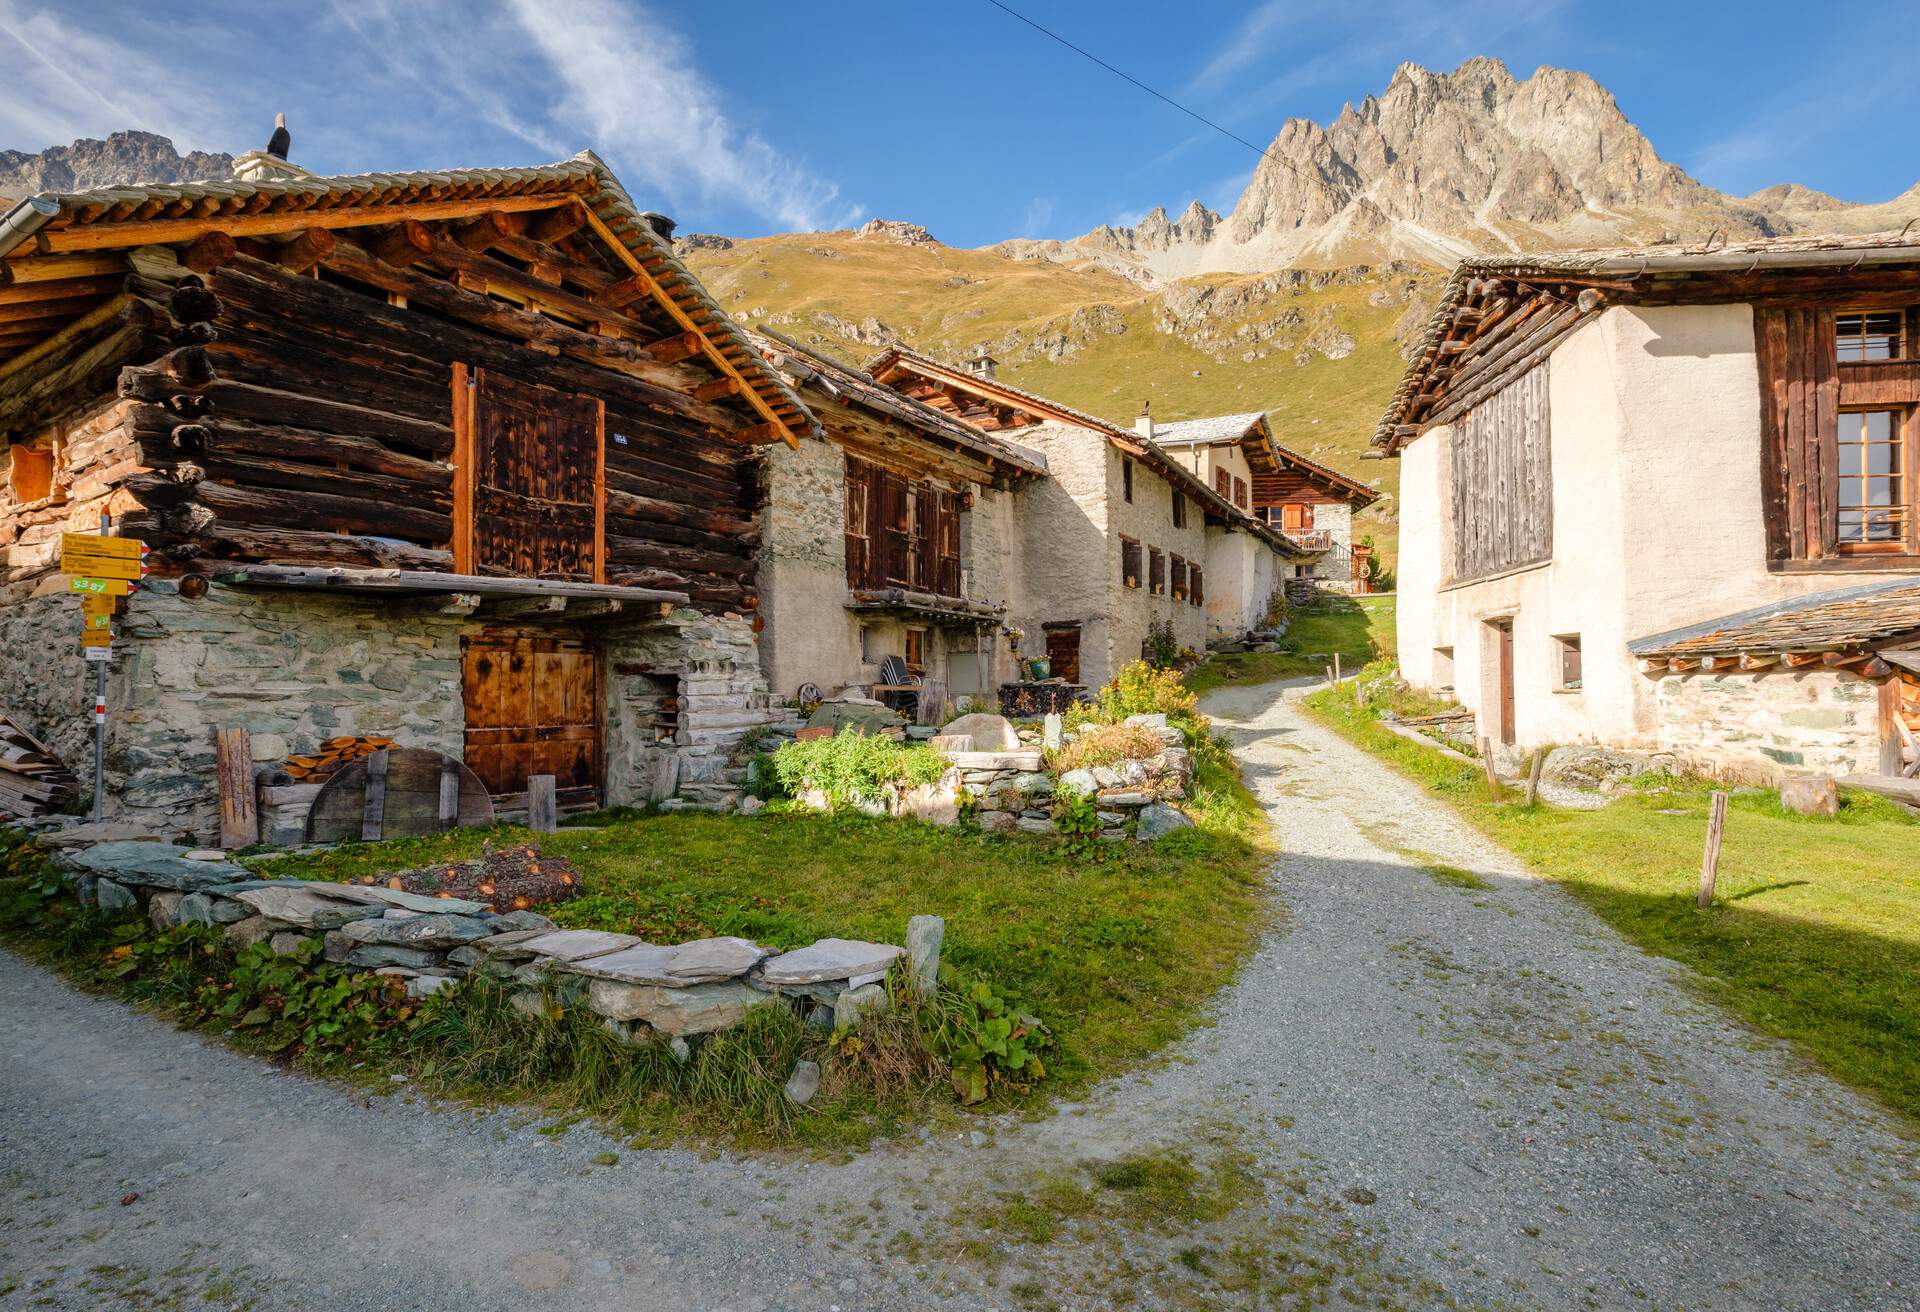 Grevasalvas is a small Swiss village that lies along the hiking path between Sils and Maloja